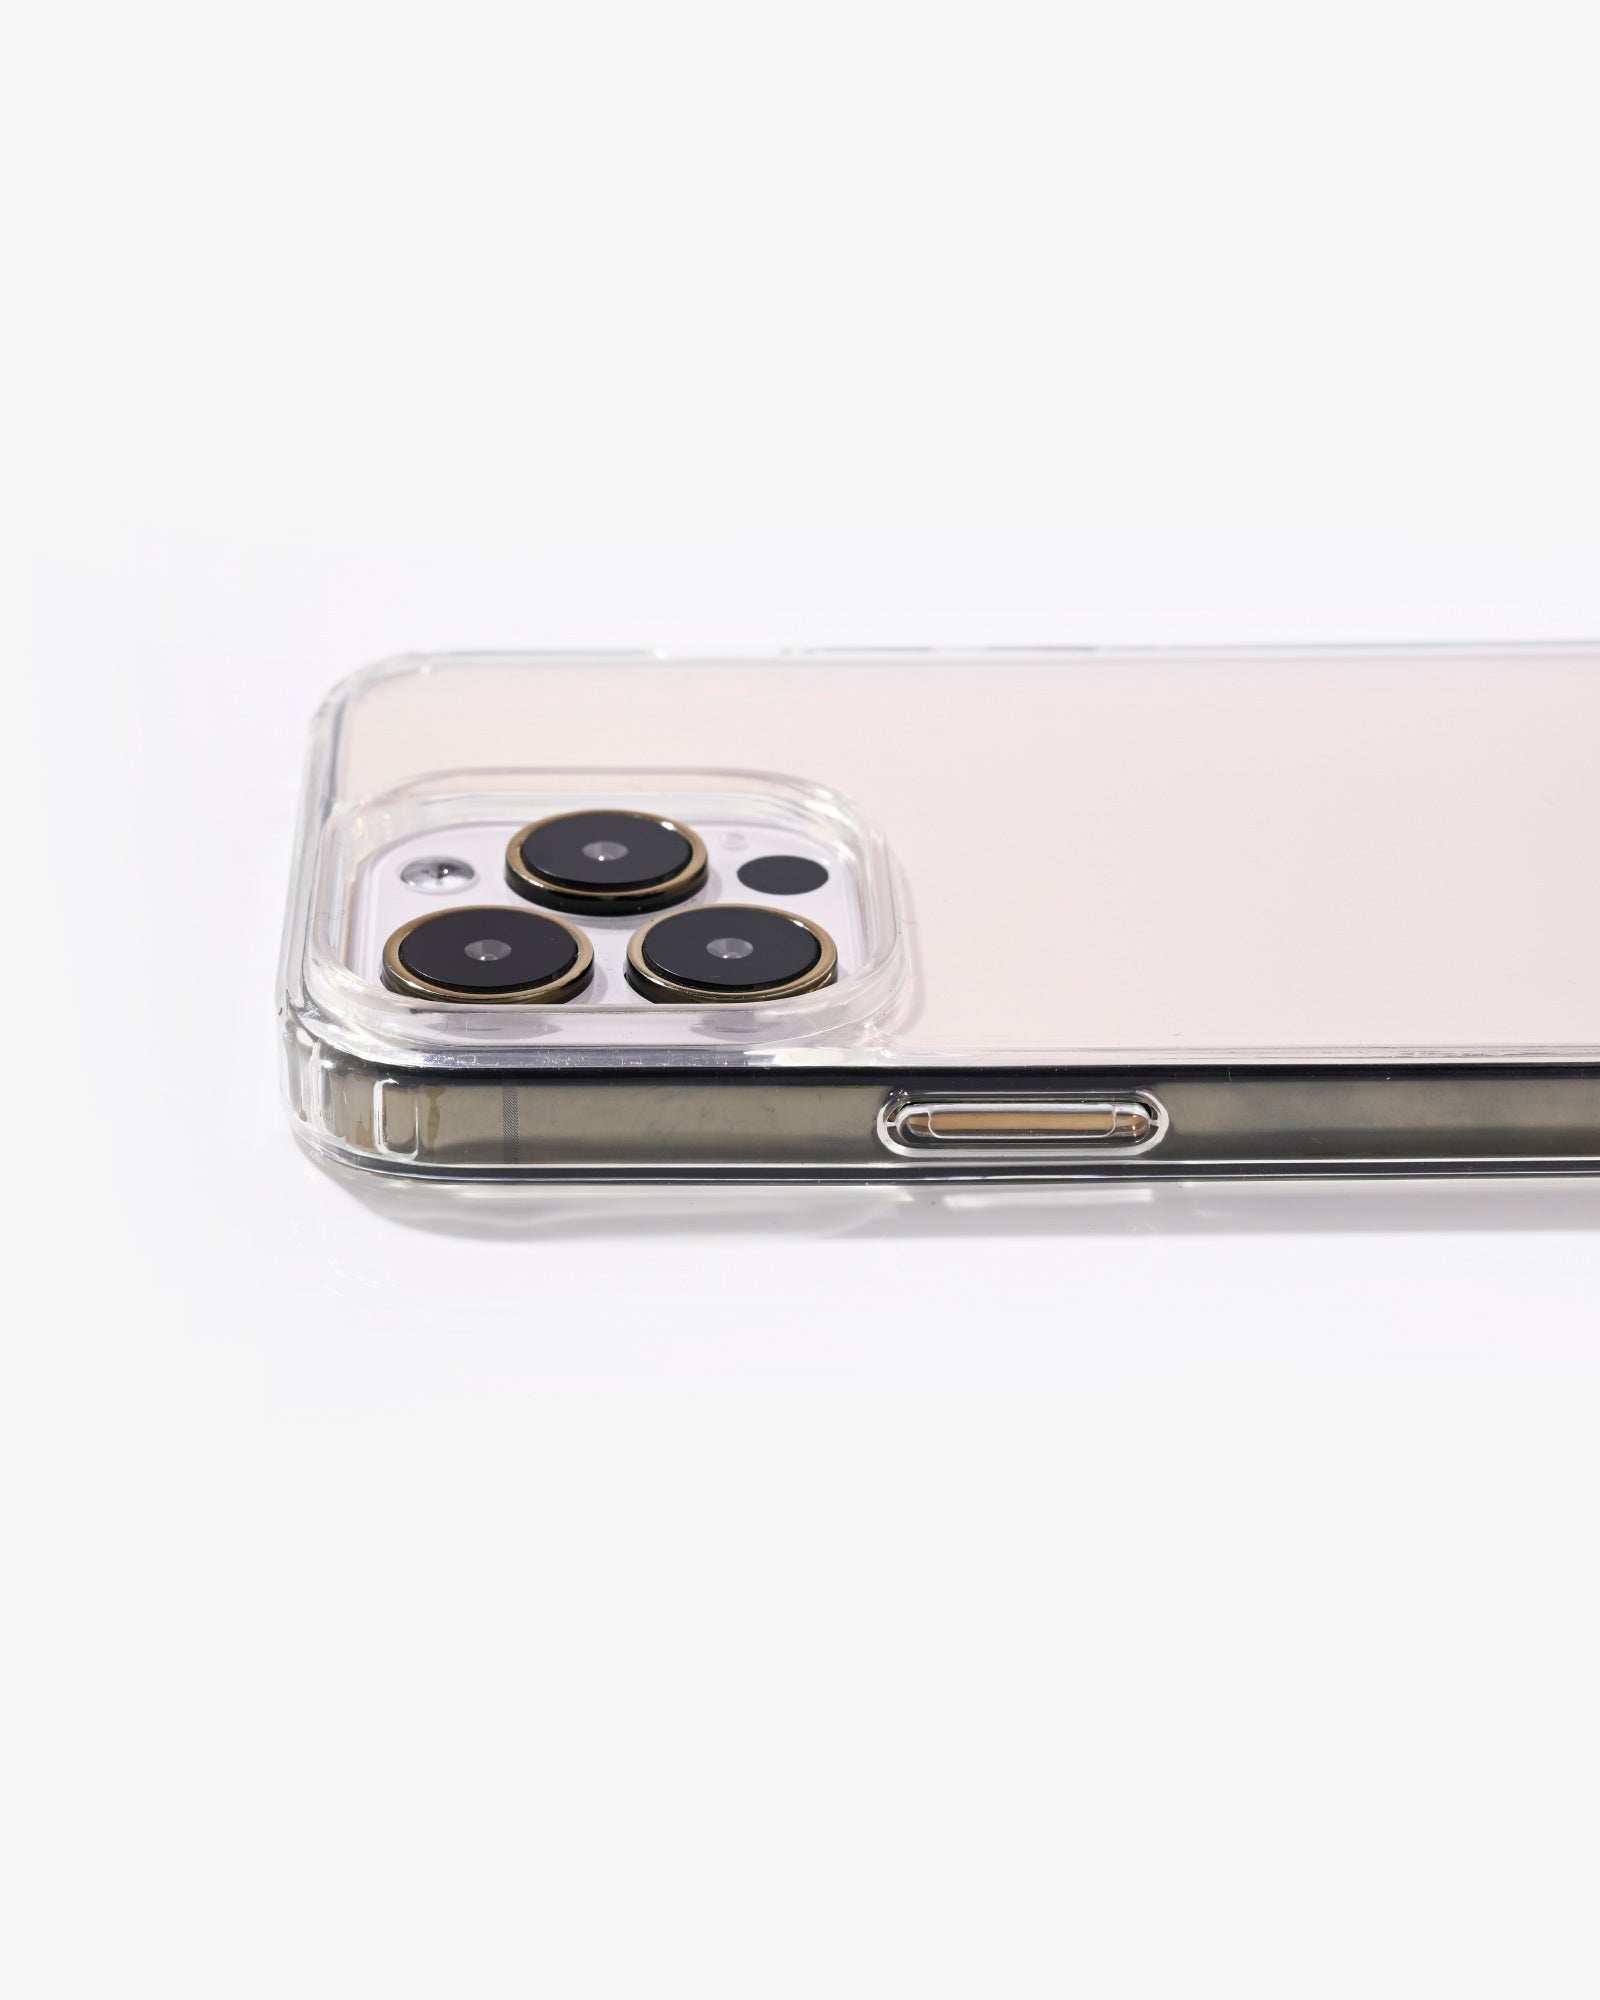 Clear Case without eyelets